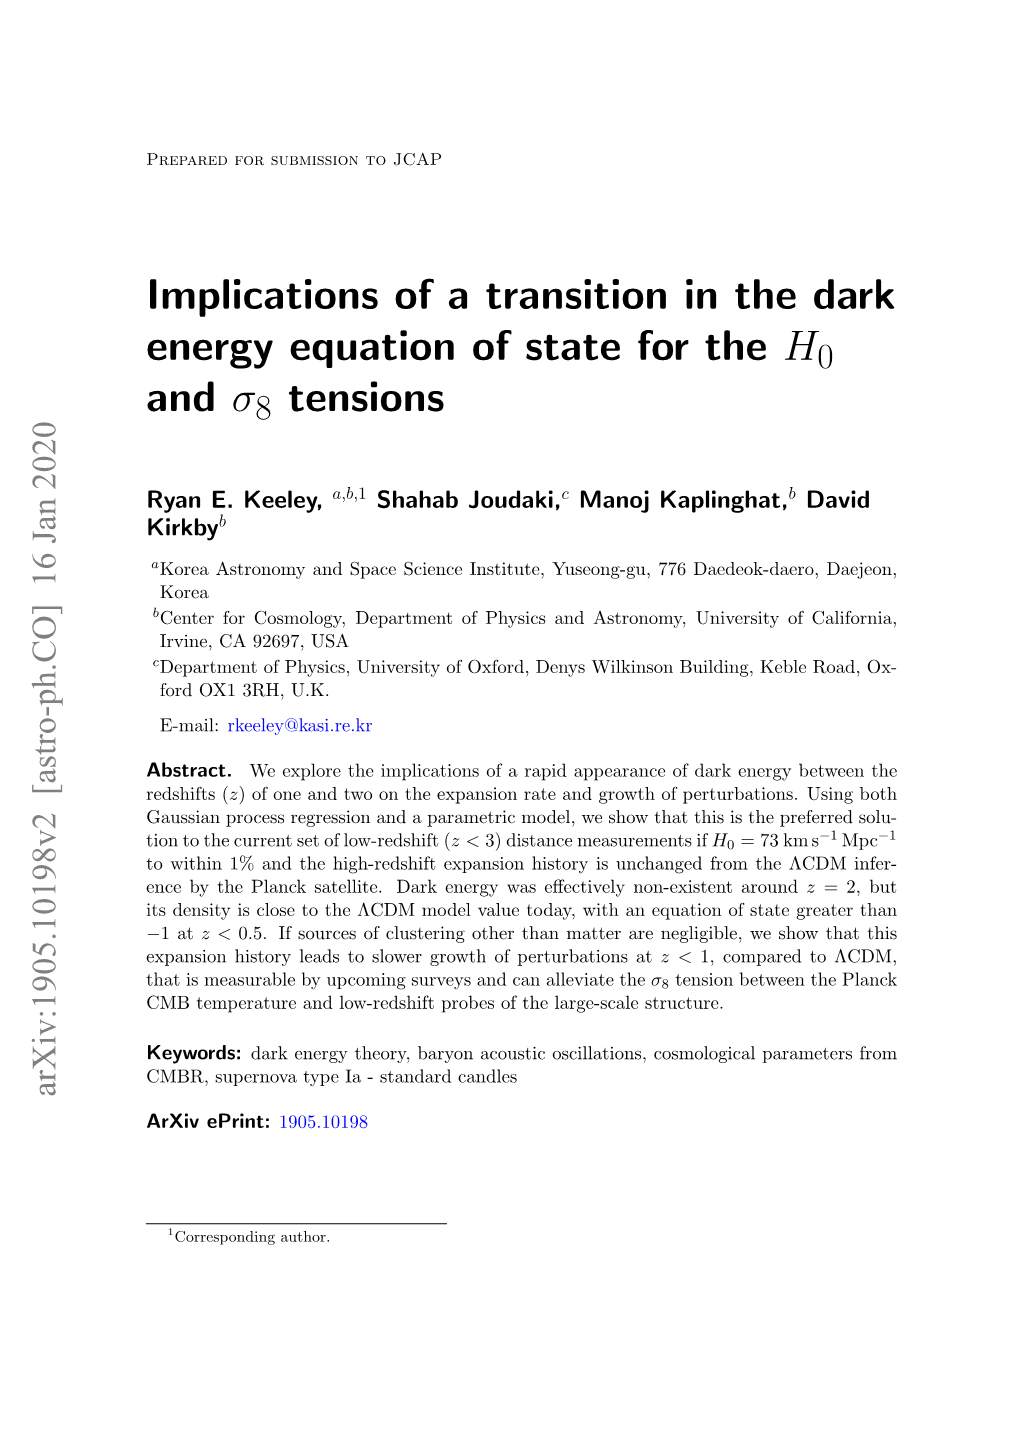 Implications of a Transition in the Dark Energy Equation of State for the H0 and Σ8 Tensions